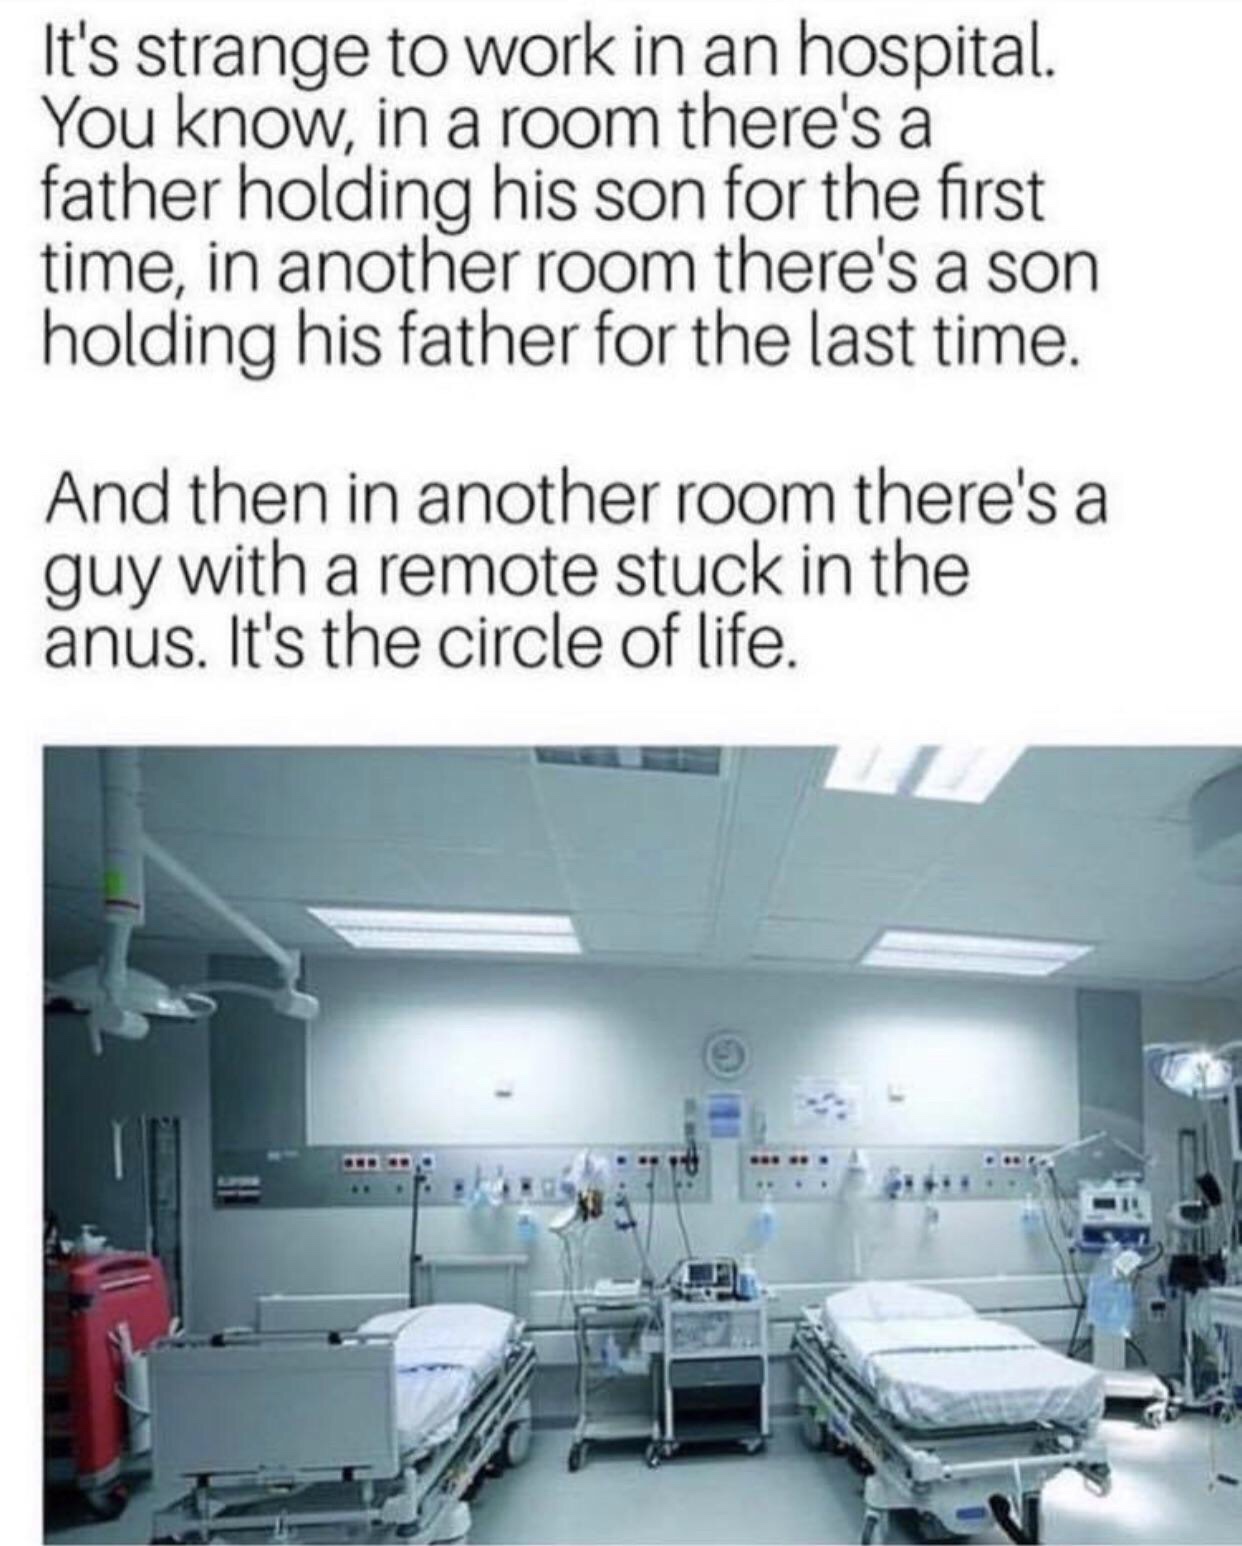 random pic hospital circle of life meme - It's strange to work in an hospital. You know, in a room there's a father holding his son for the first time, in another room there's a son holding his father for the last time. And then in another room there's a 